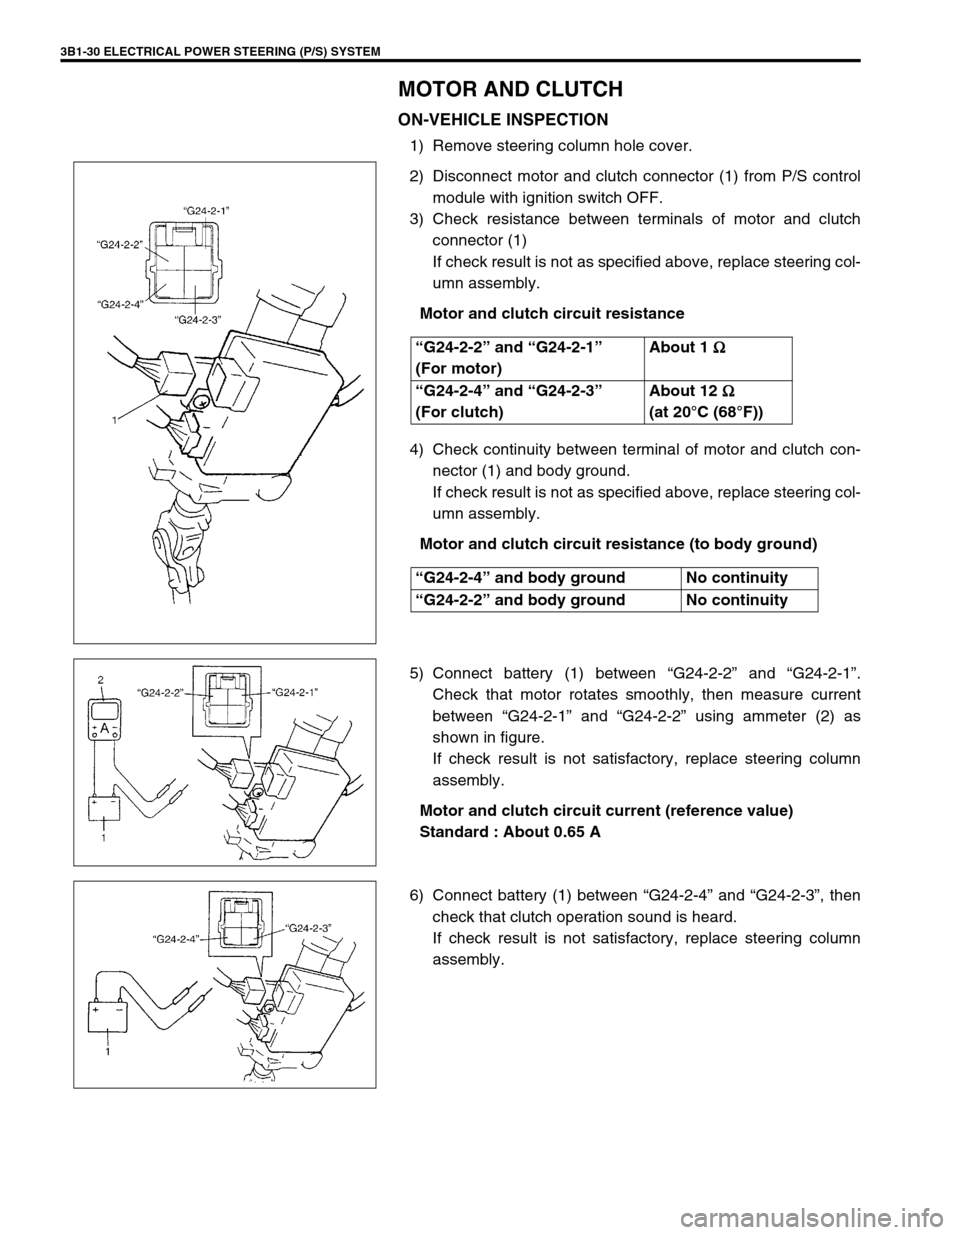 SUZUKI SWIFT 2000 1.G RG413 Service Owners Manual 3B1-30 ELECTRICAL POWER STEERING (P/S) SYSTEM
MOTOR AND CLUTCH
ON-VEHICLE INSPECTION
1) Remove steering column hole cover.
2) Disconnect motor and clutch connector (1) from P/S control
module with ign